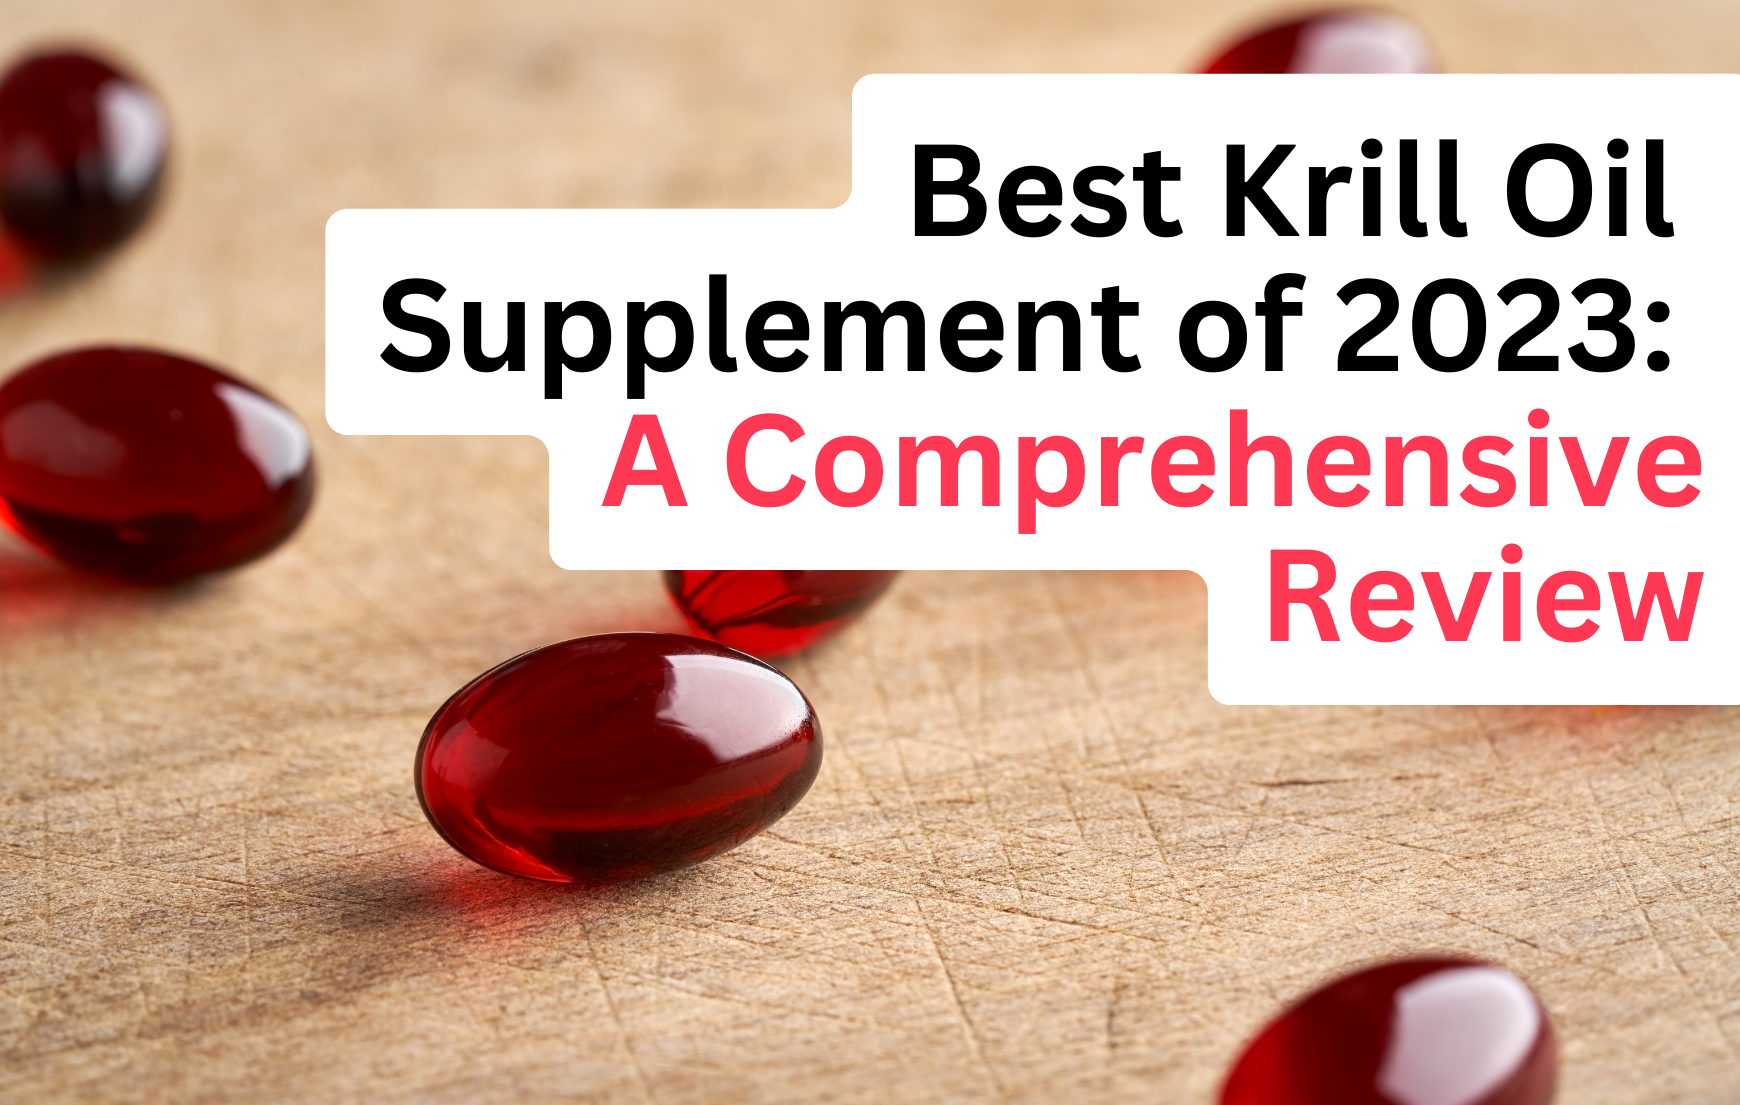 Best Krill Oil Supplement of 2023: A Comprehensive Review